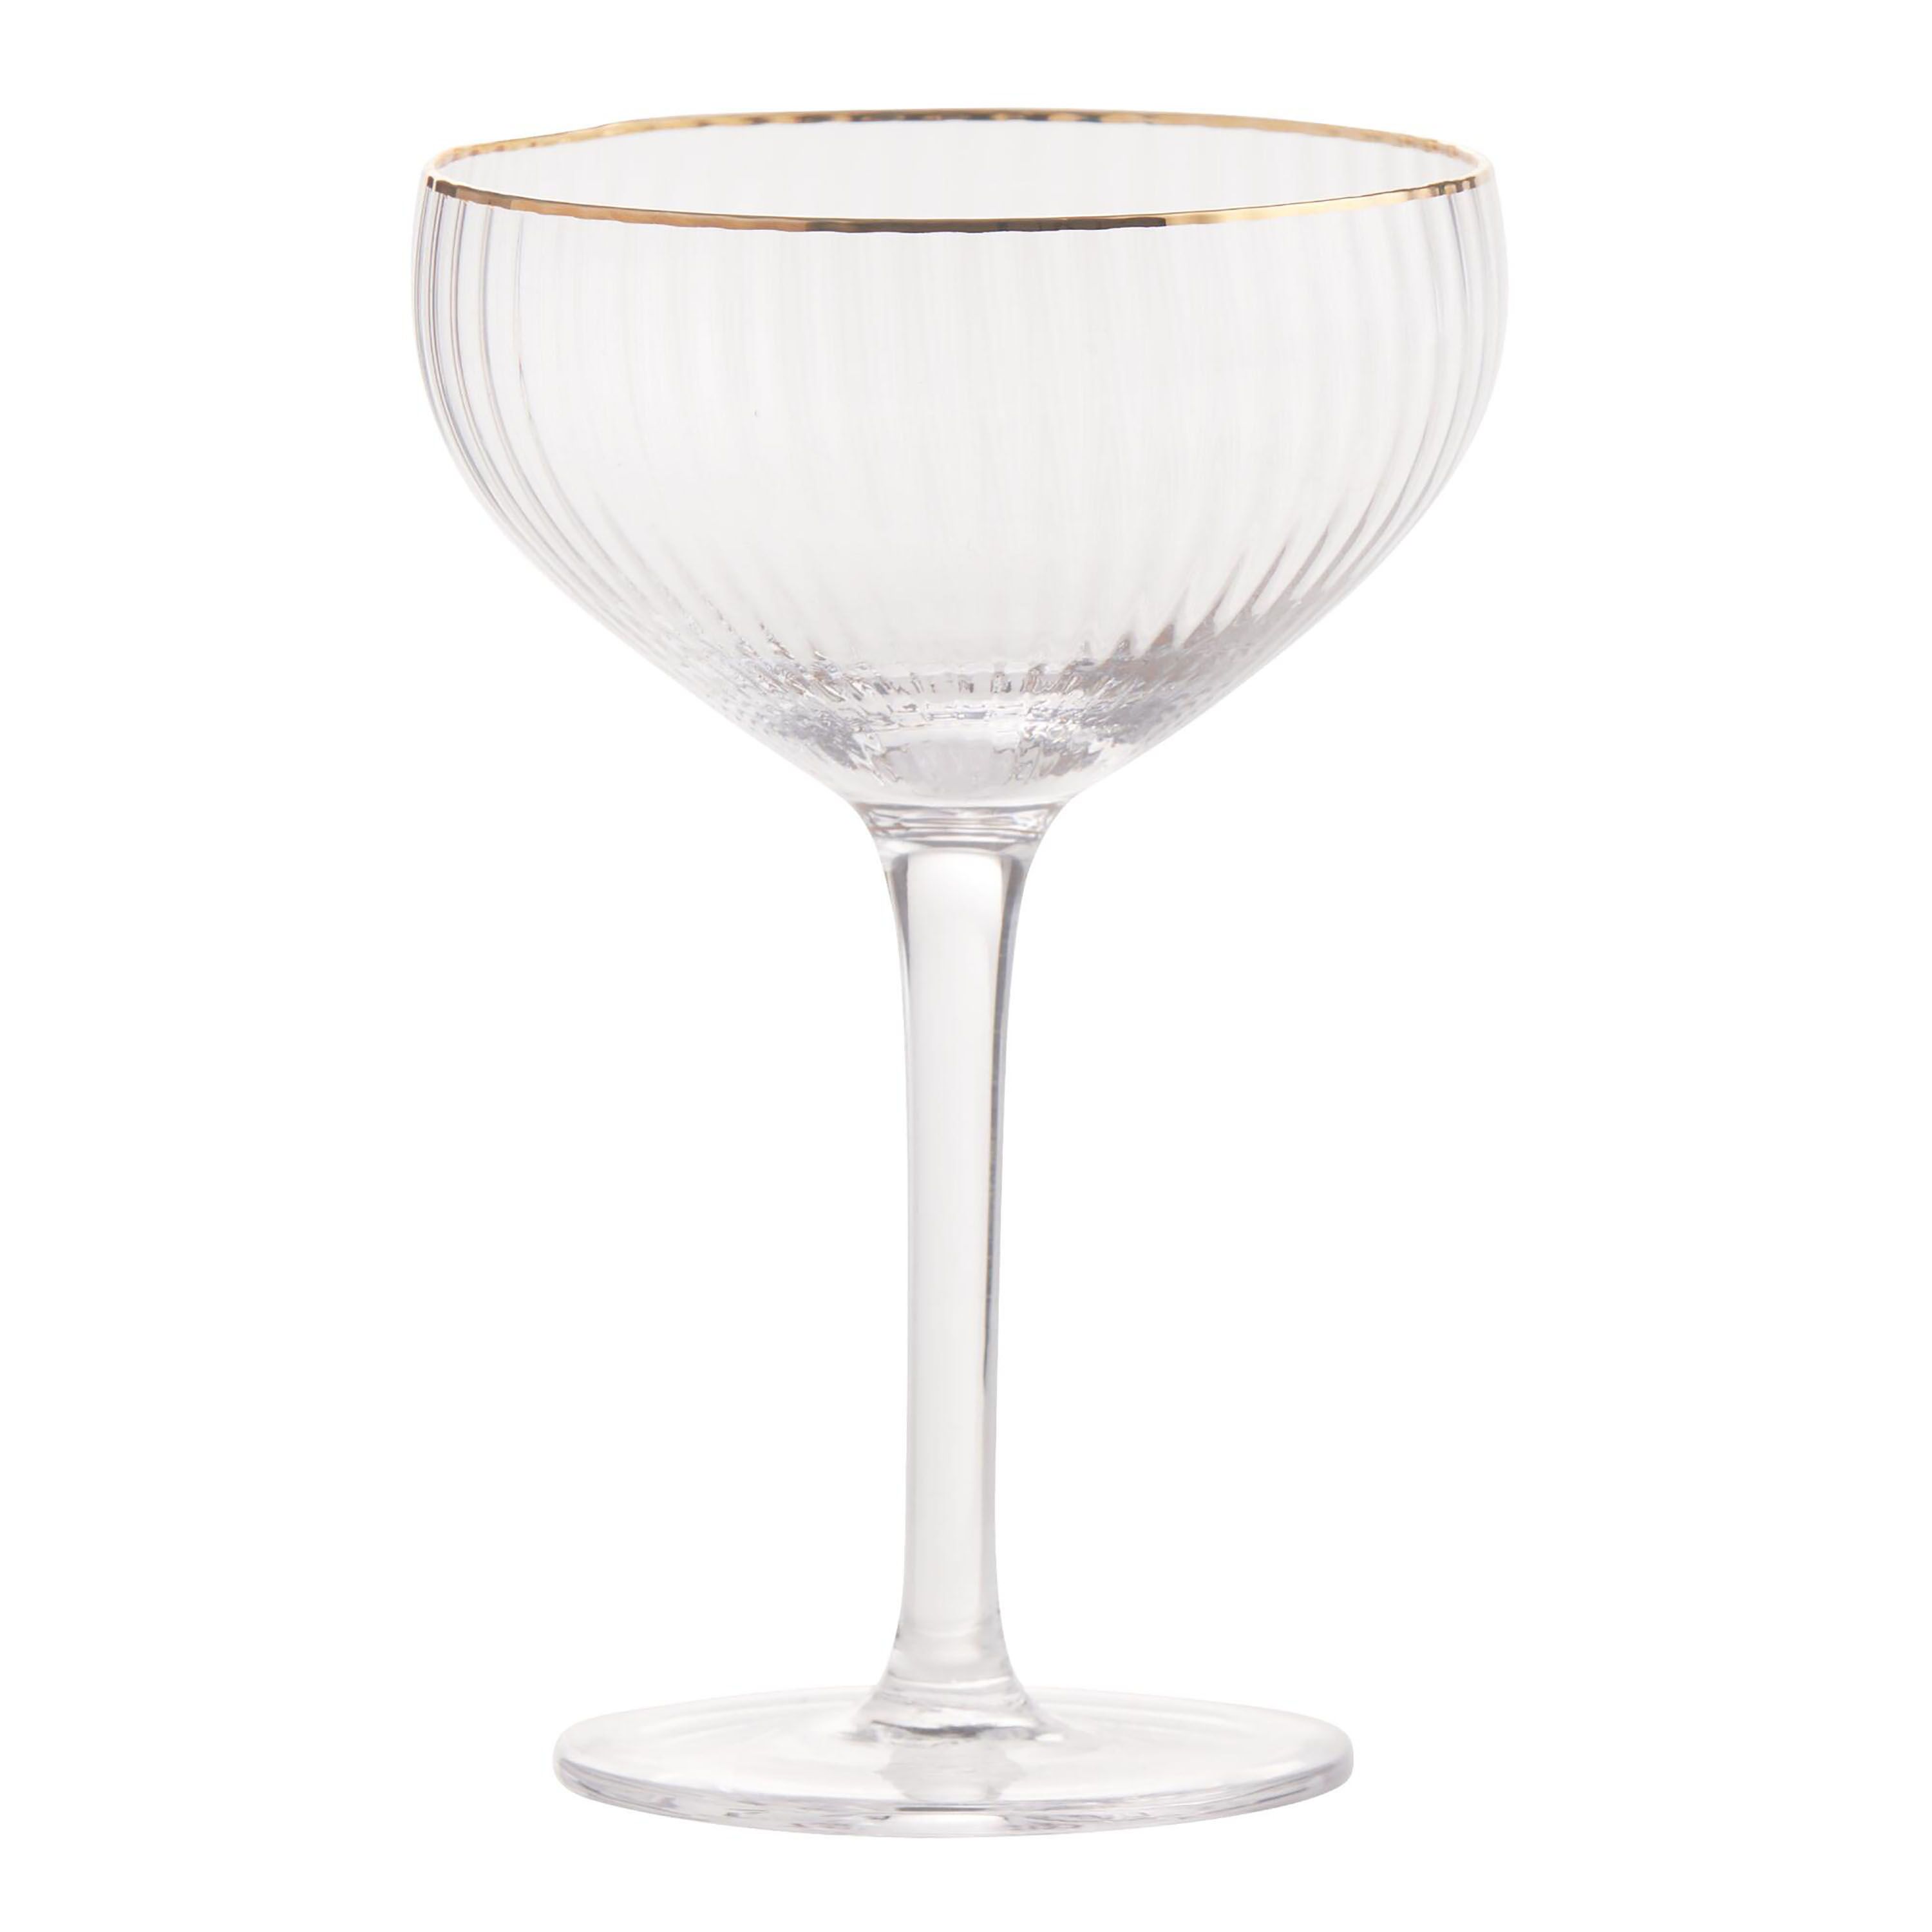 Gold Rim Ribbed Coupe Glass | World Market